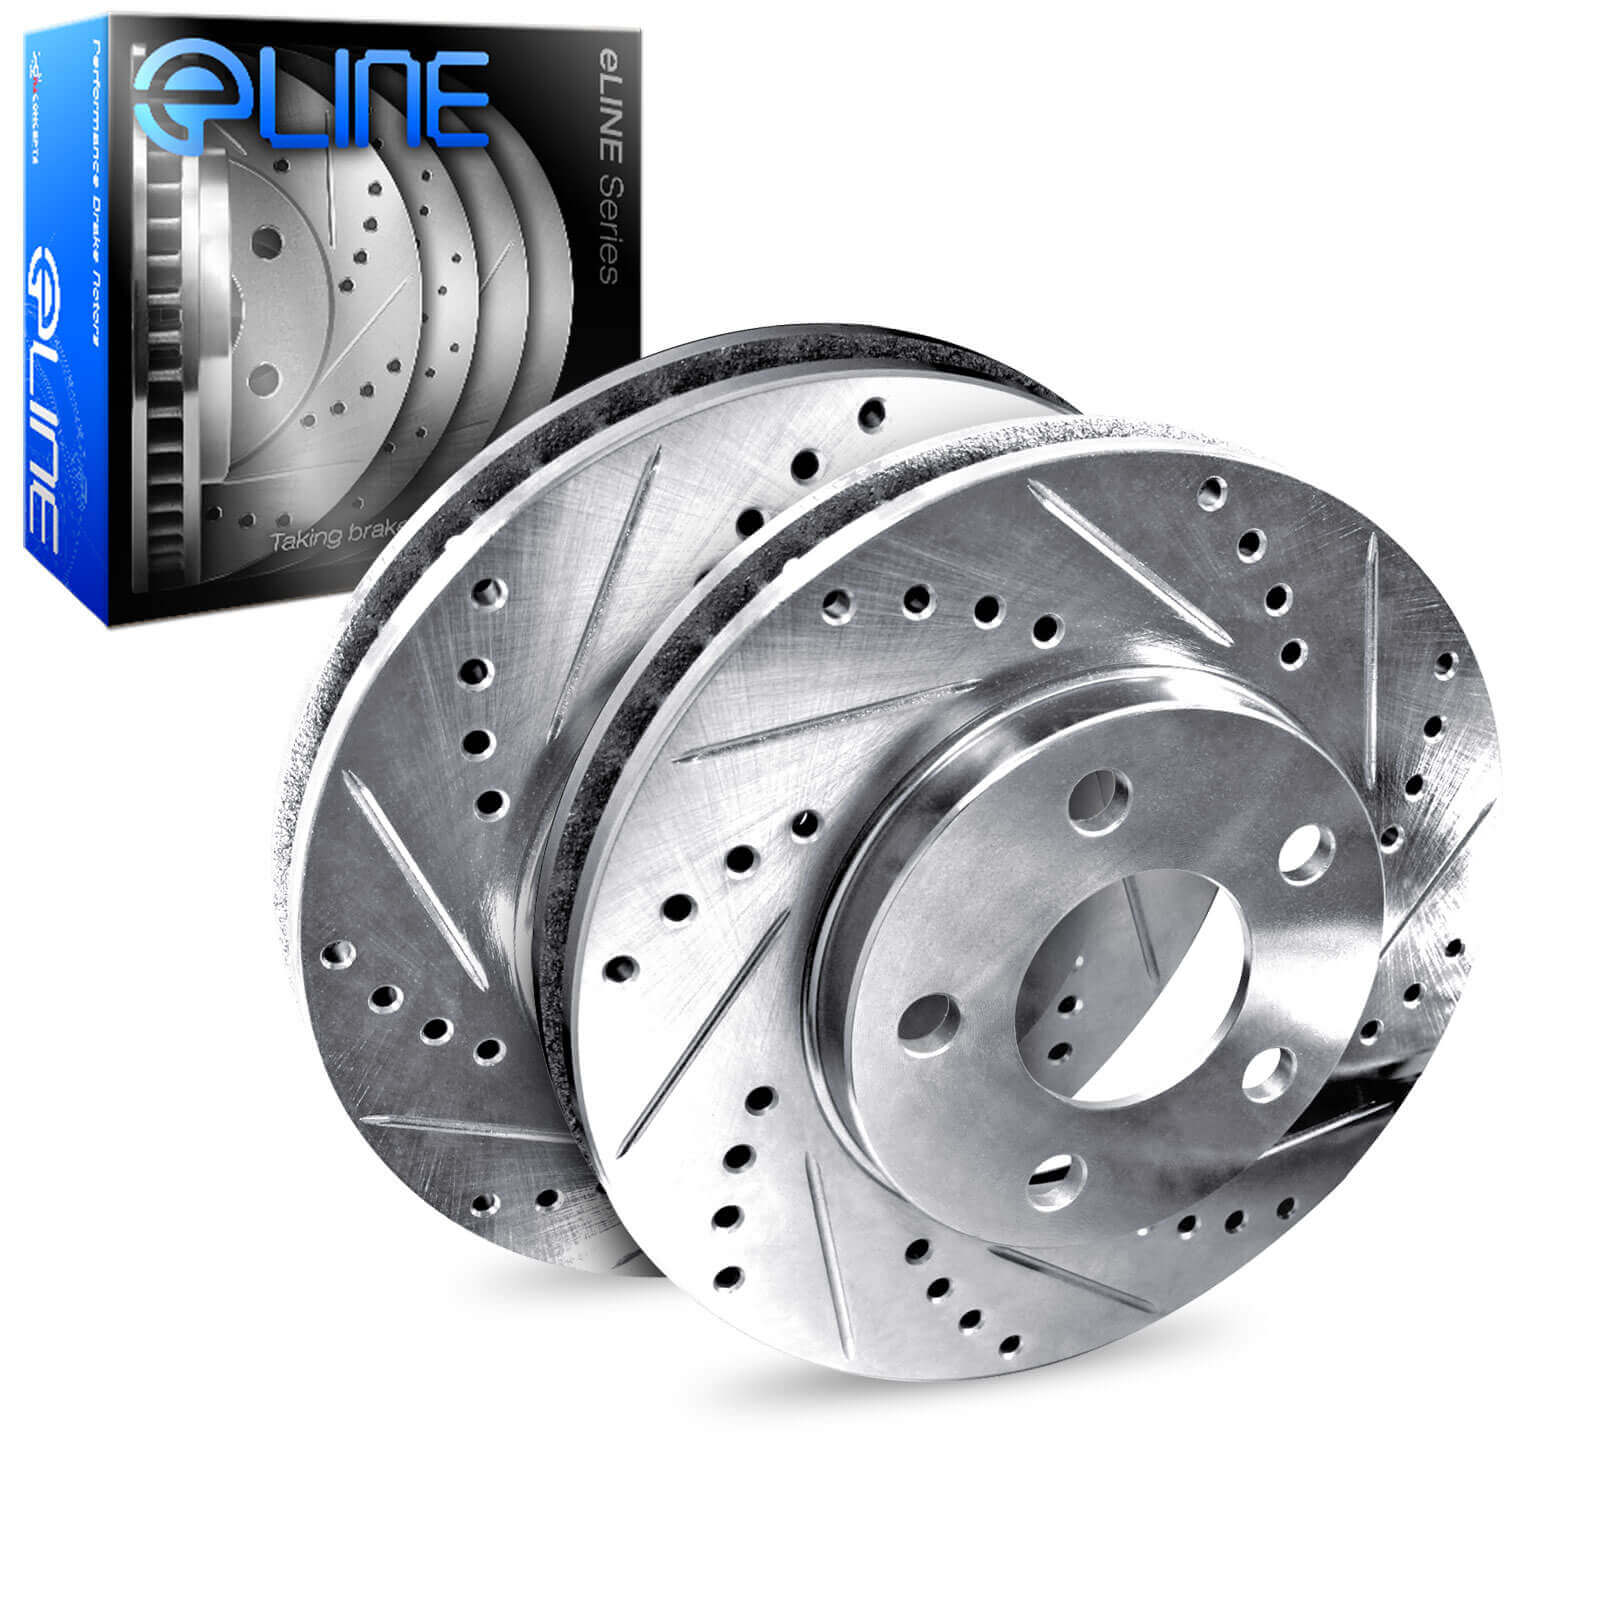 eLINE-Series - Drilled and Slotted rotor